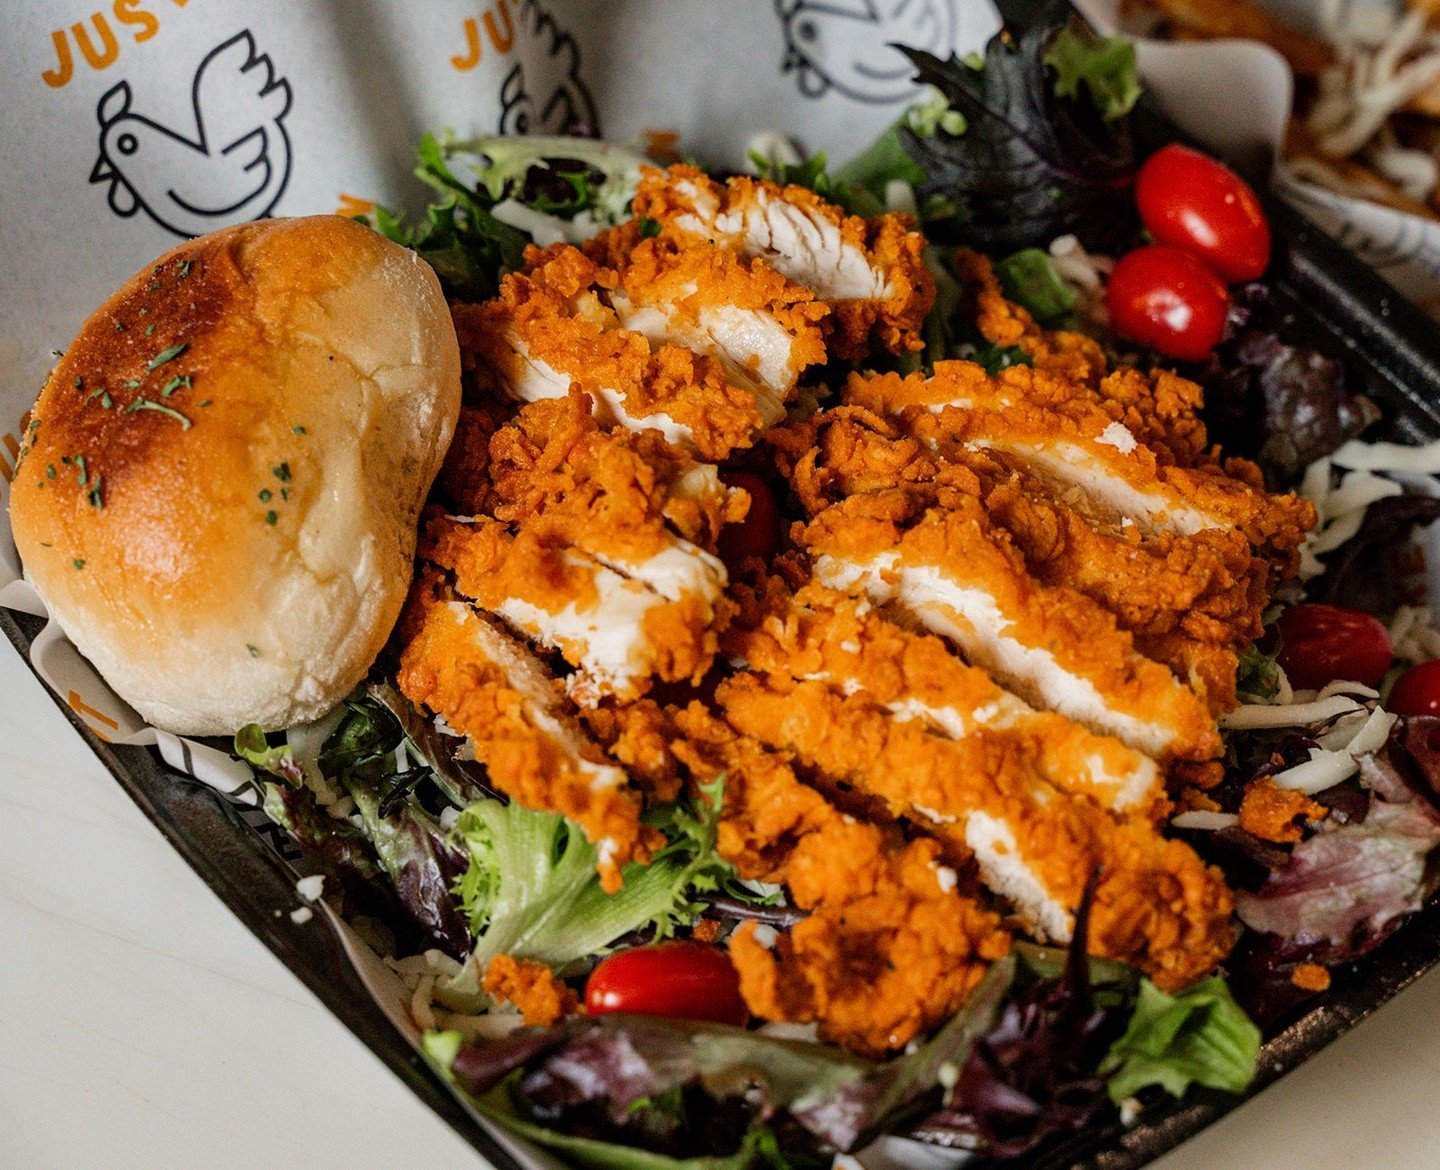 The Just Chicken Salad...it's anything but Just a salad.

.

.

#JustChicken #TenderLover #chickentenders #tenders #614living #614eats #614foodie #foodie #FoodForThought #asseenincolumbus #lifeincbus #onlyincbus #eastmarket #cbusfood #cbuseats #cbusf